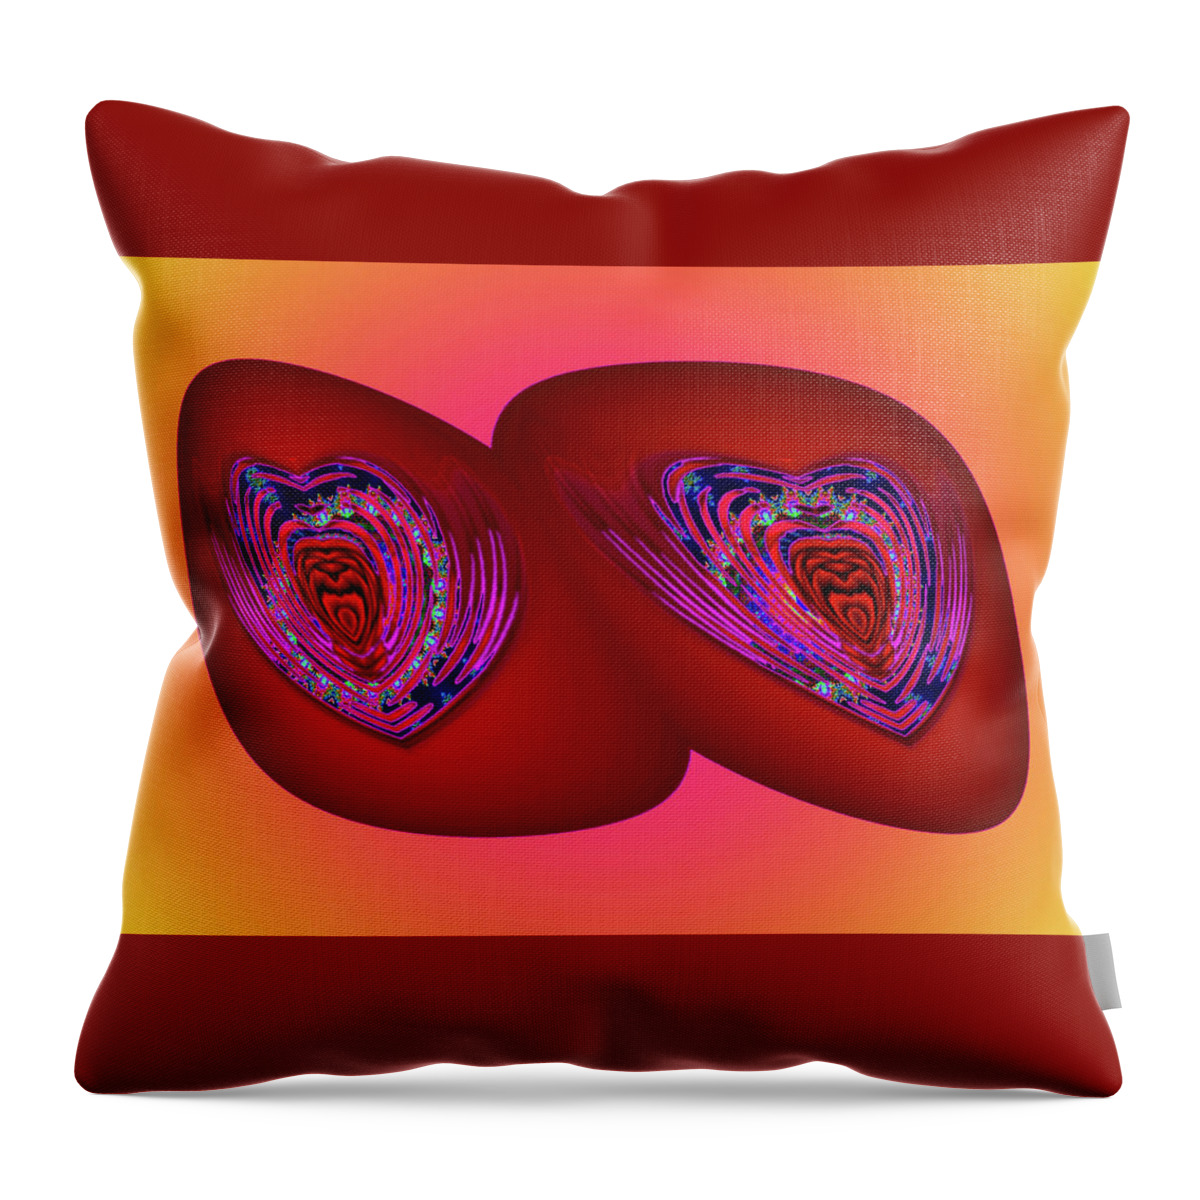 Lovers Healing Stones Throw Pillow featuring the digital art Lovers Healing Stones by Mike Breau